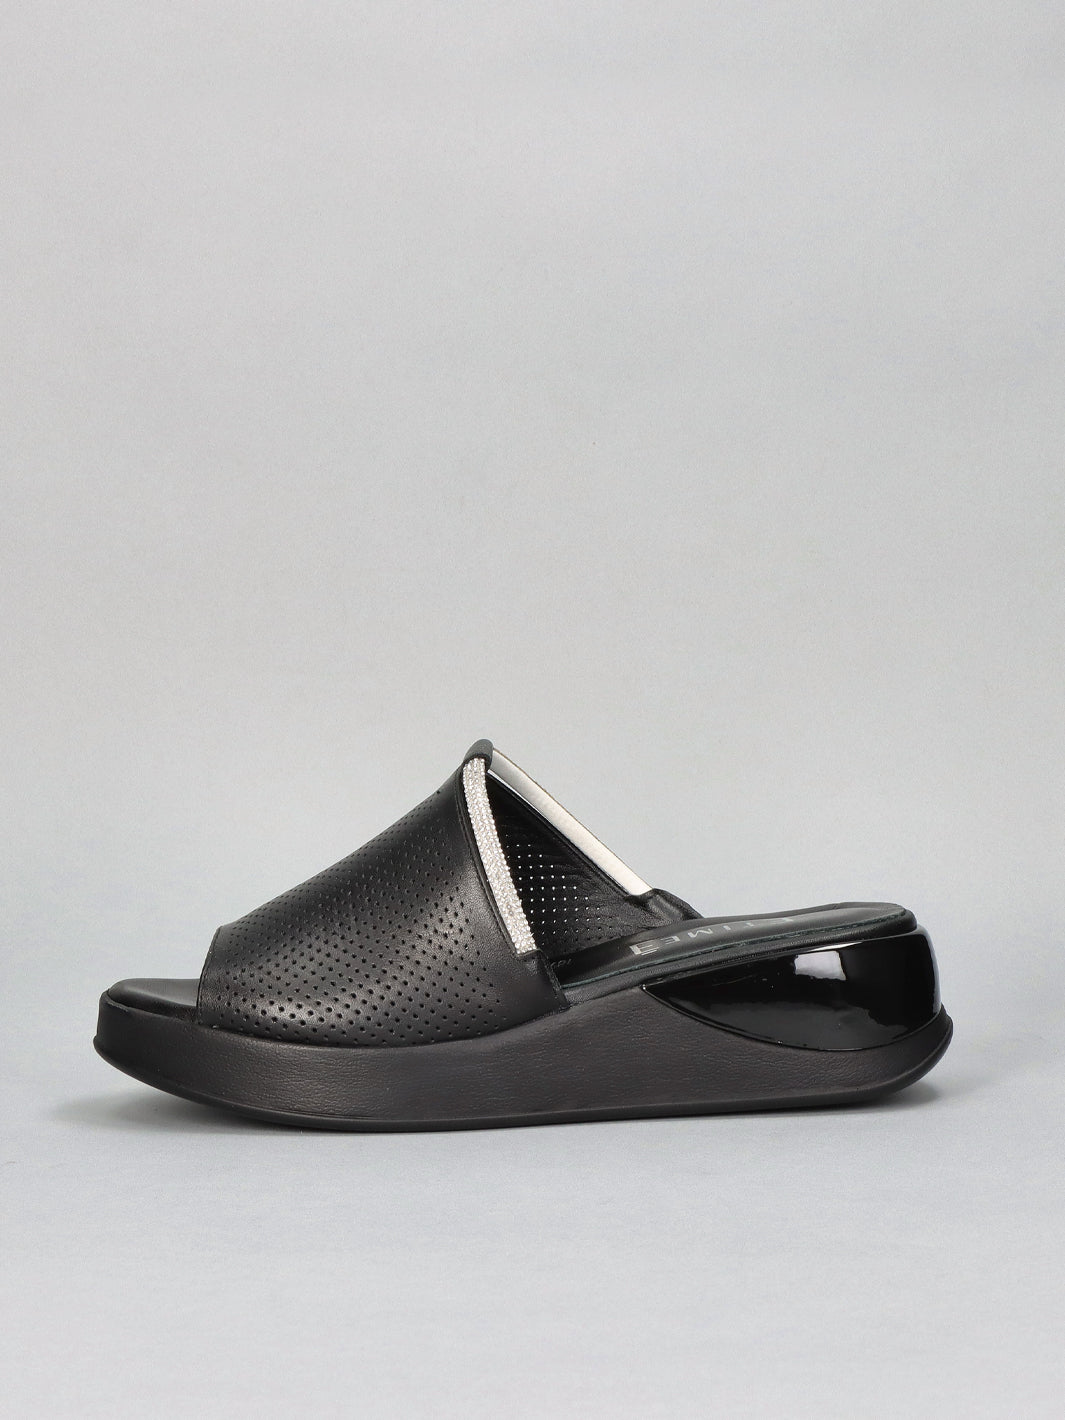 LEATHER SLIPPERS - BLACK